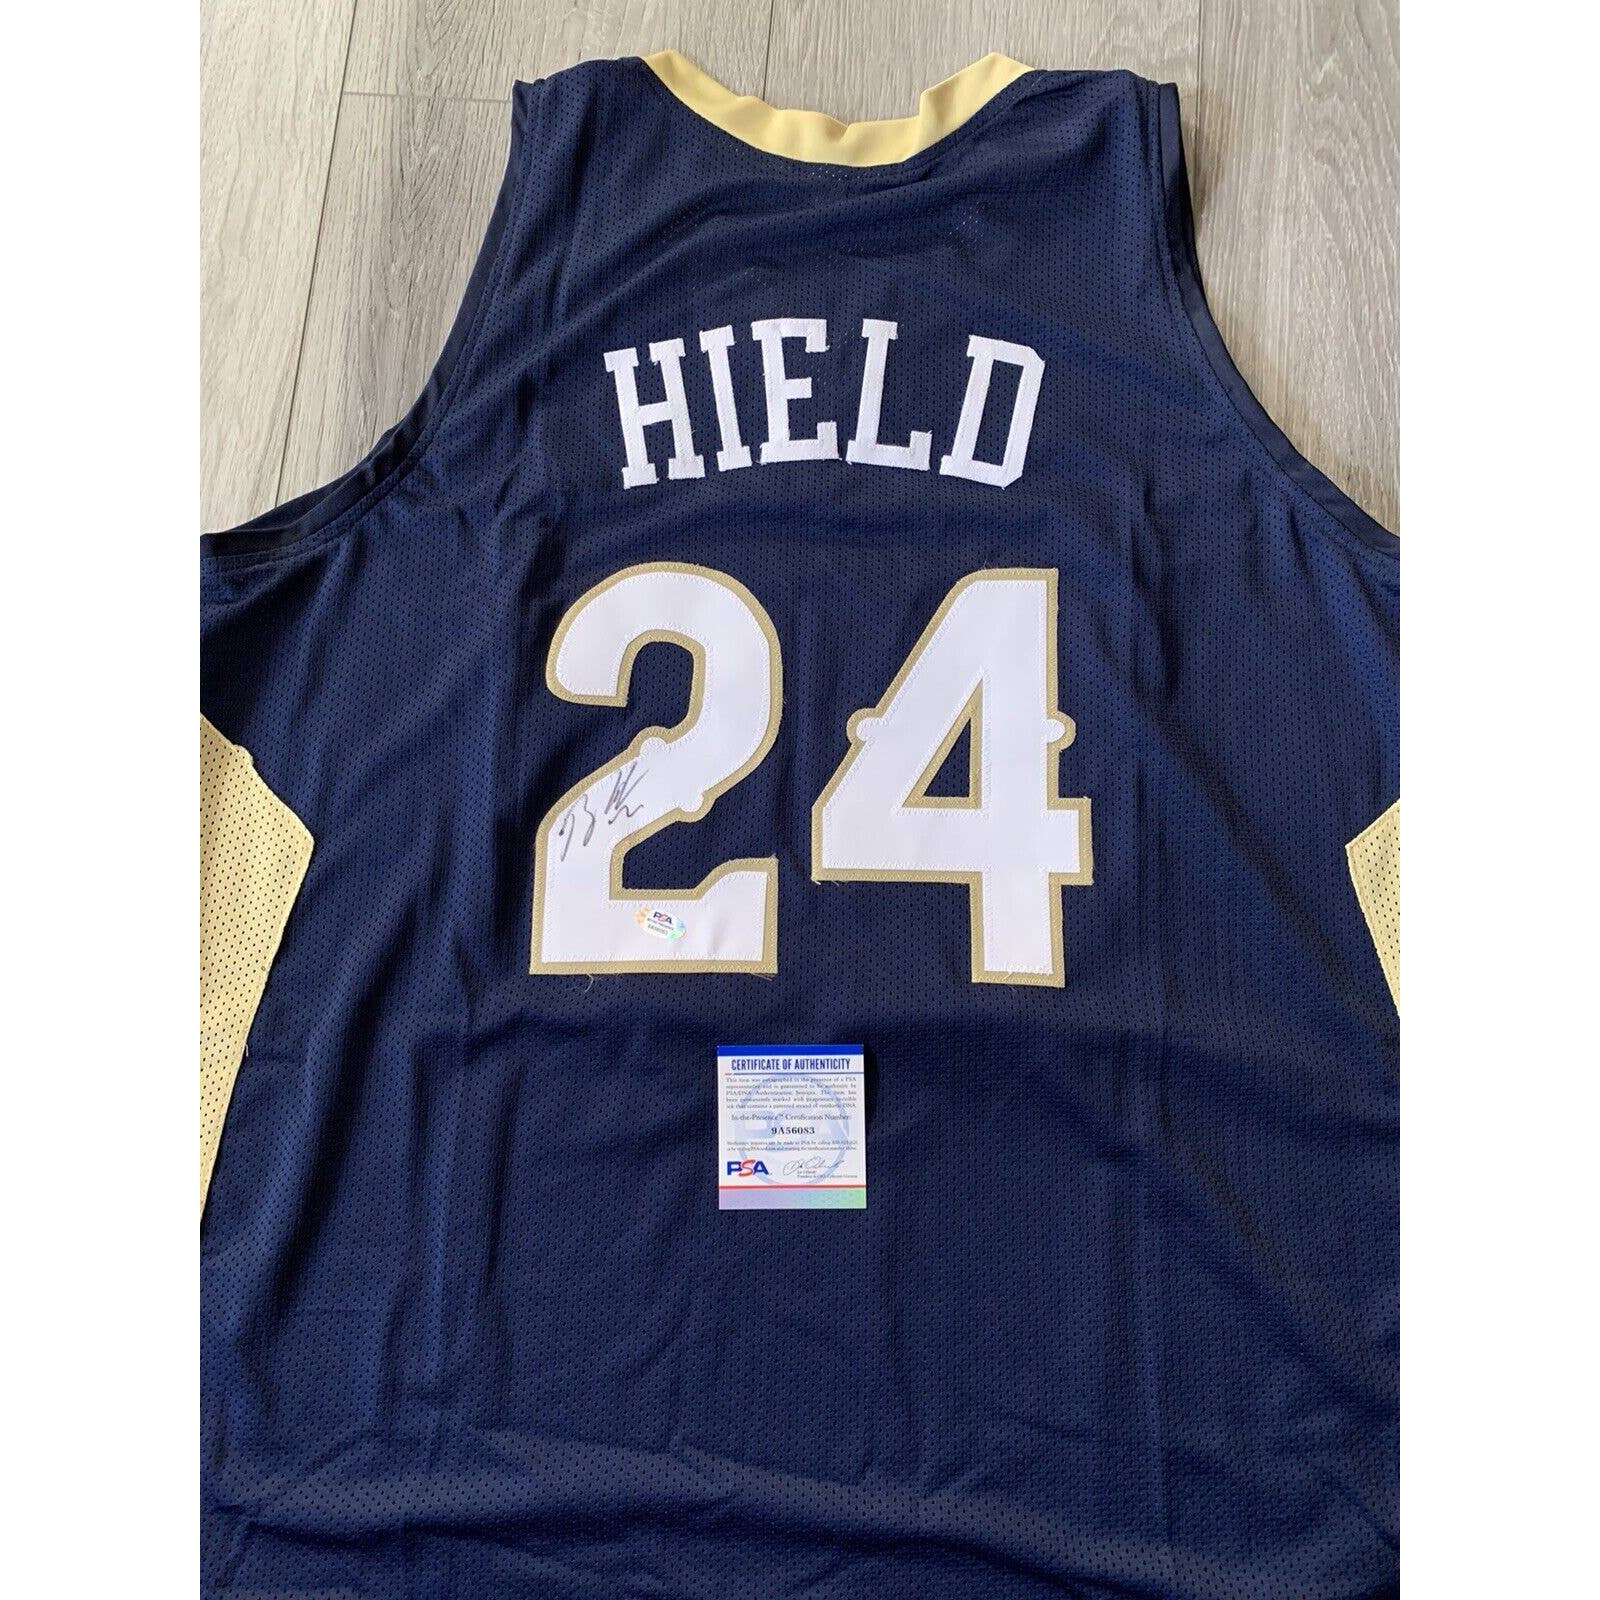 Buddy Hield Autographed/Signed Jersey PSA/DNA New Orleans Pelicans - TreasuresEvolved